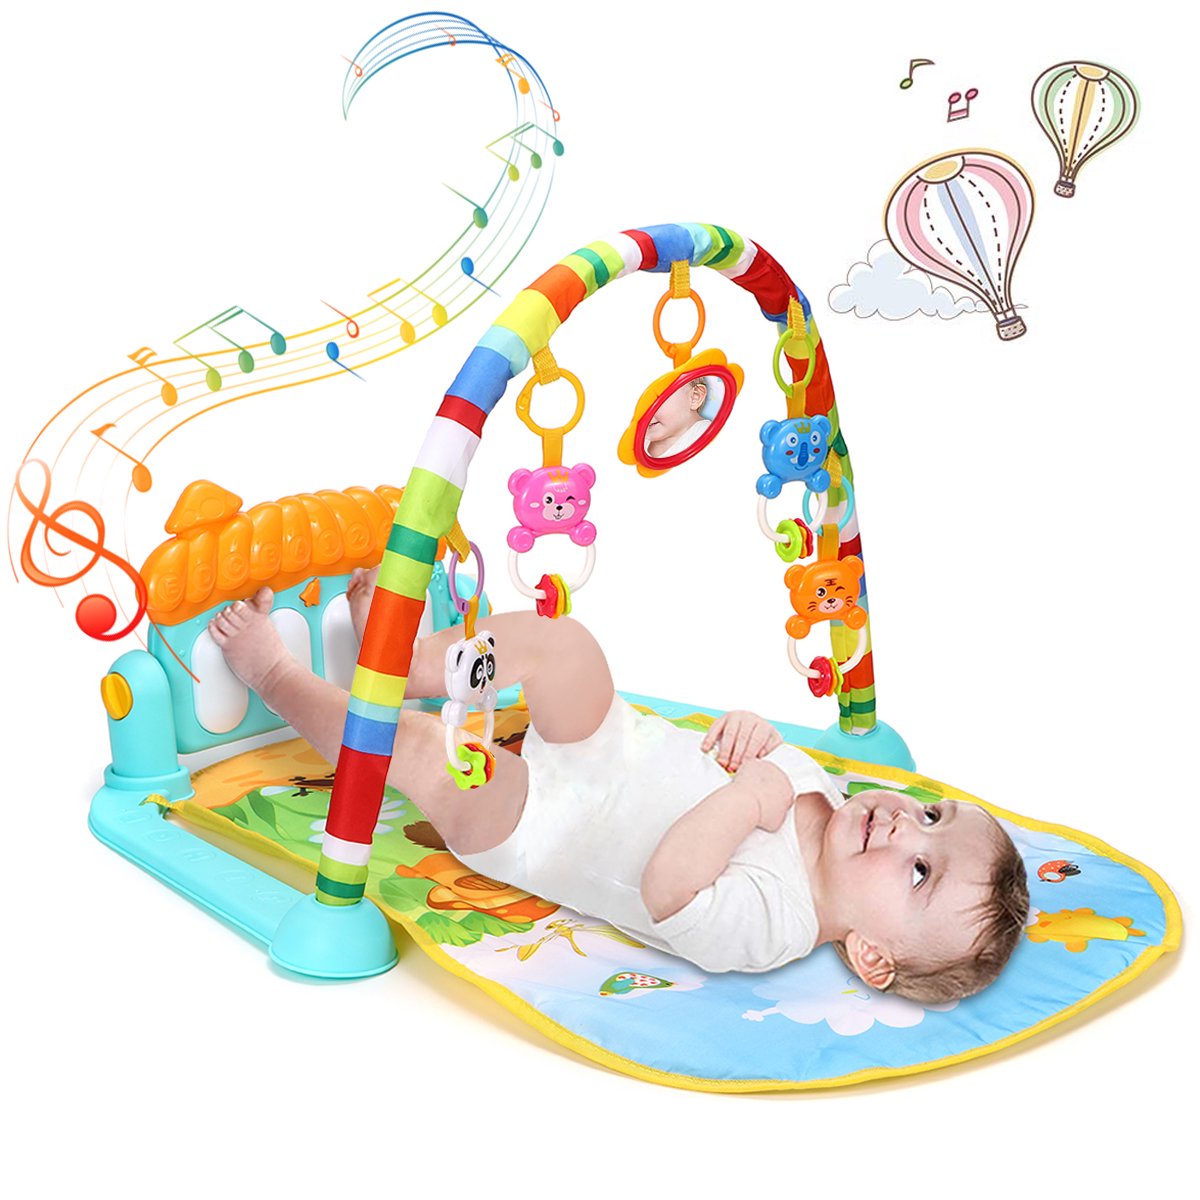 YQSDG Baby Gym Play Mats Mulitcolor 3 in 1 Kick and Play Piano Gym Activity Center for Infants, Journey of Discovery Activity Gym and Play Mat with Music and Lights - image 1 of 9